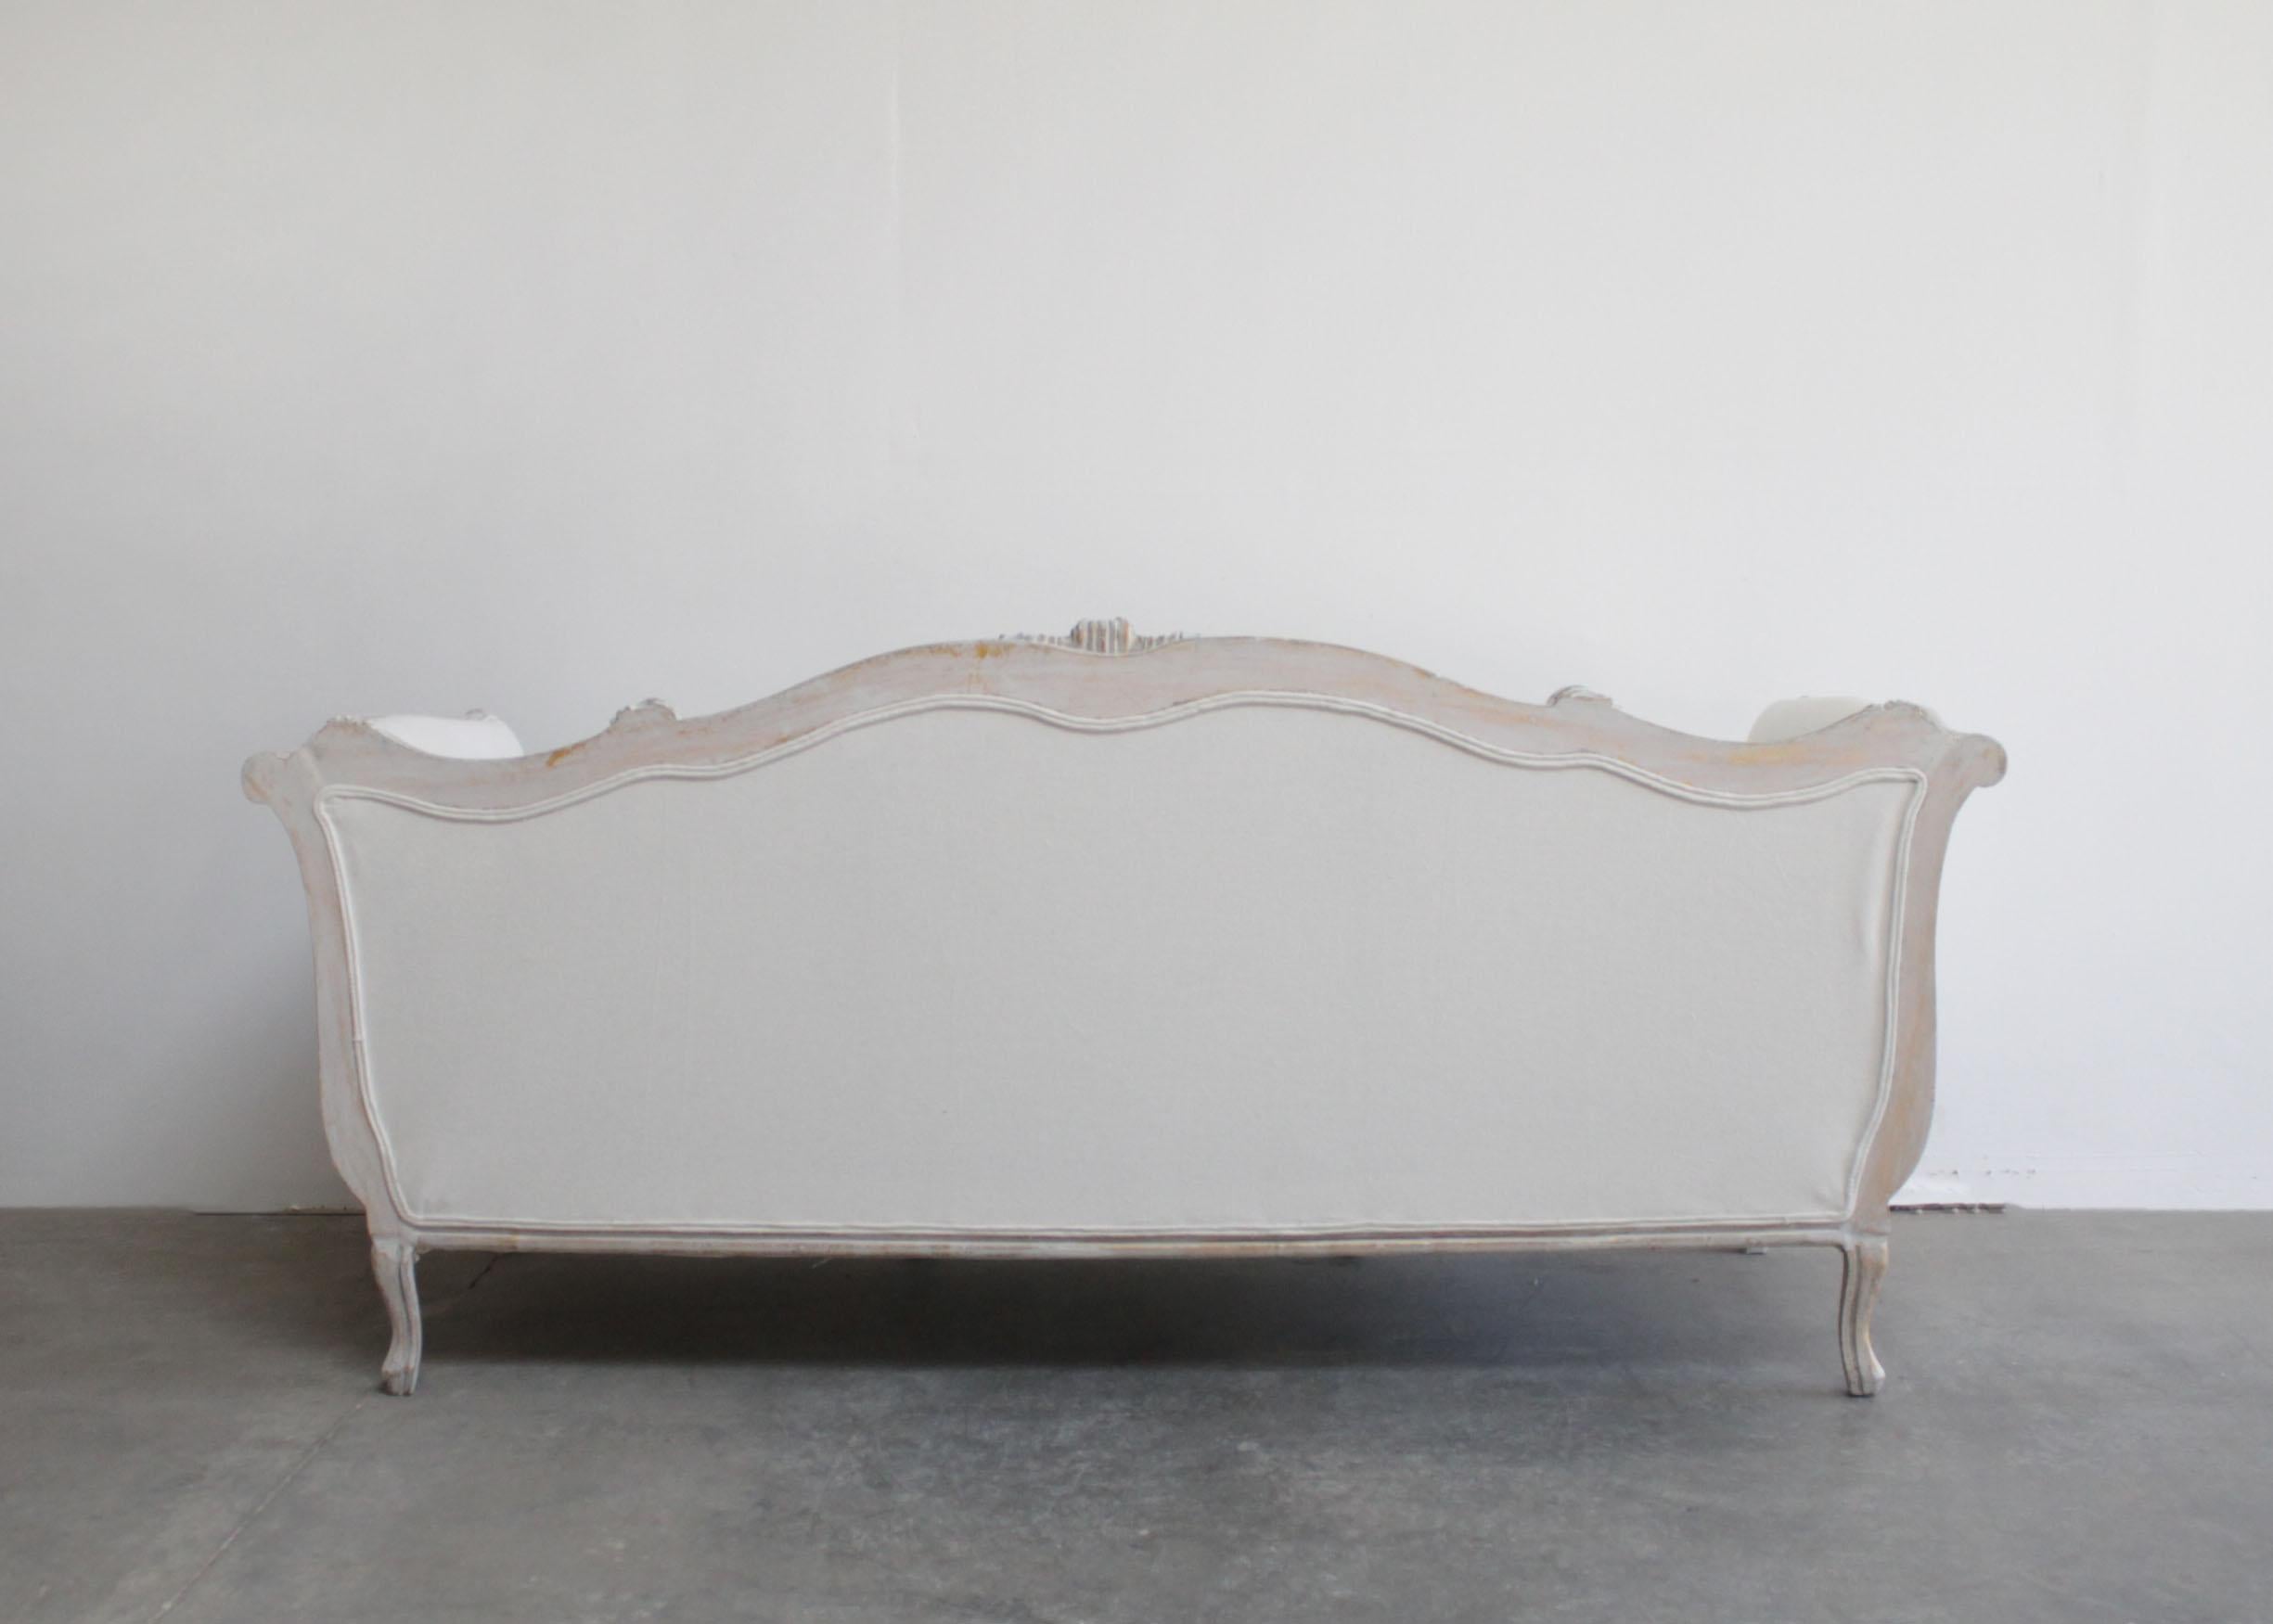 Cotton Vintage Painted and Upholstered Louis XV Daybed Style Sofa